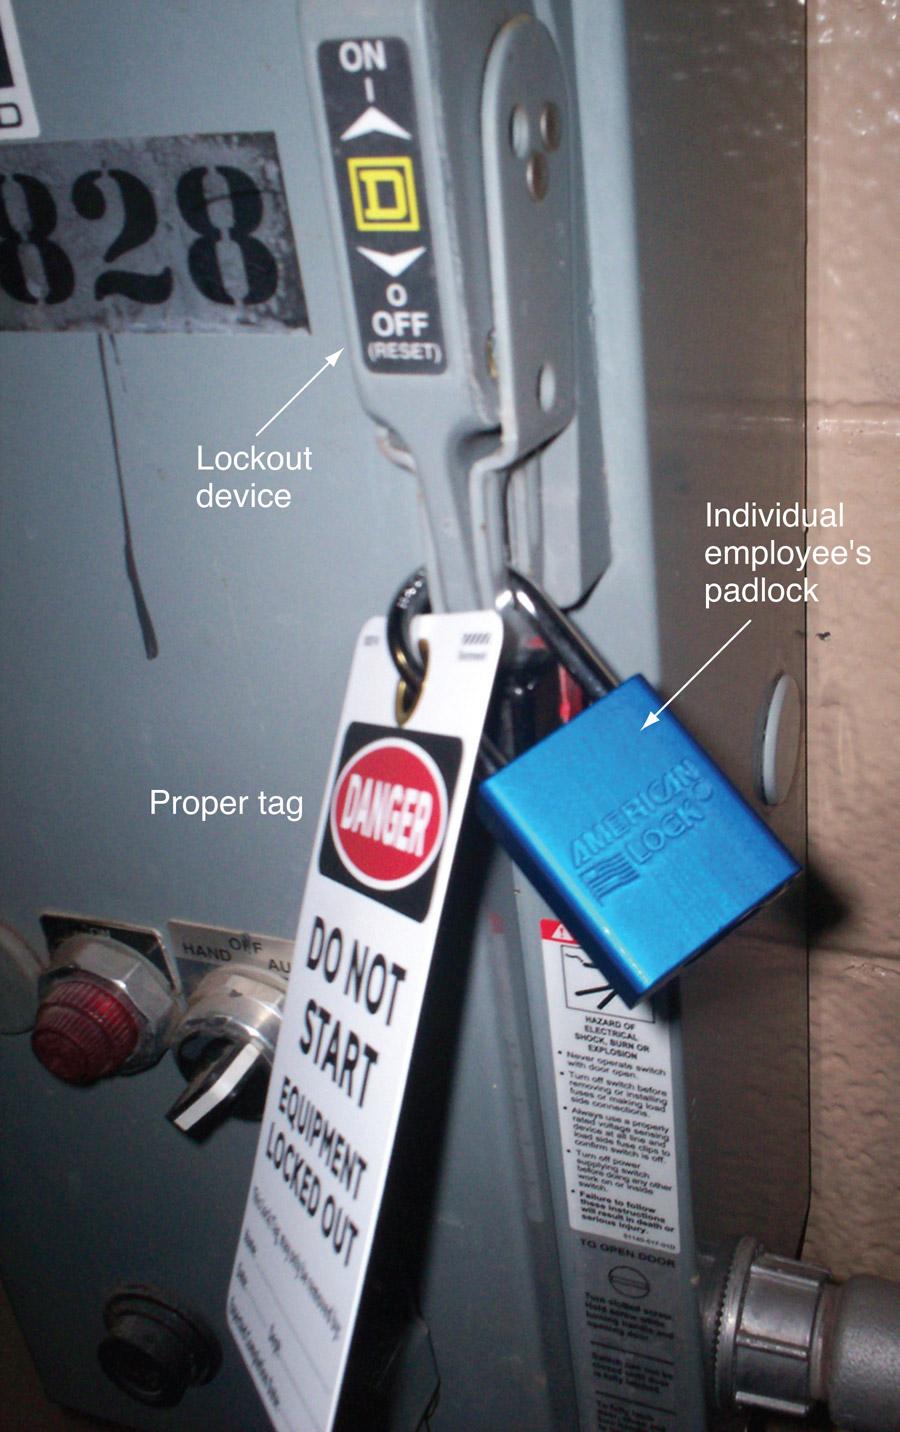 However, OSHA does have a regulation that requires protective equipment when working where a potential electrical hazard exists.